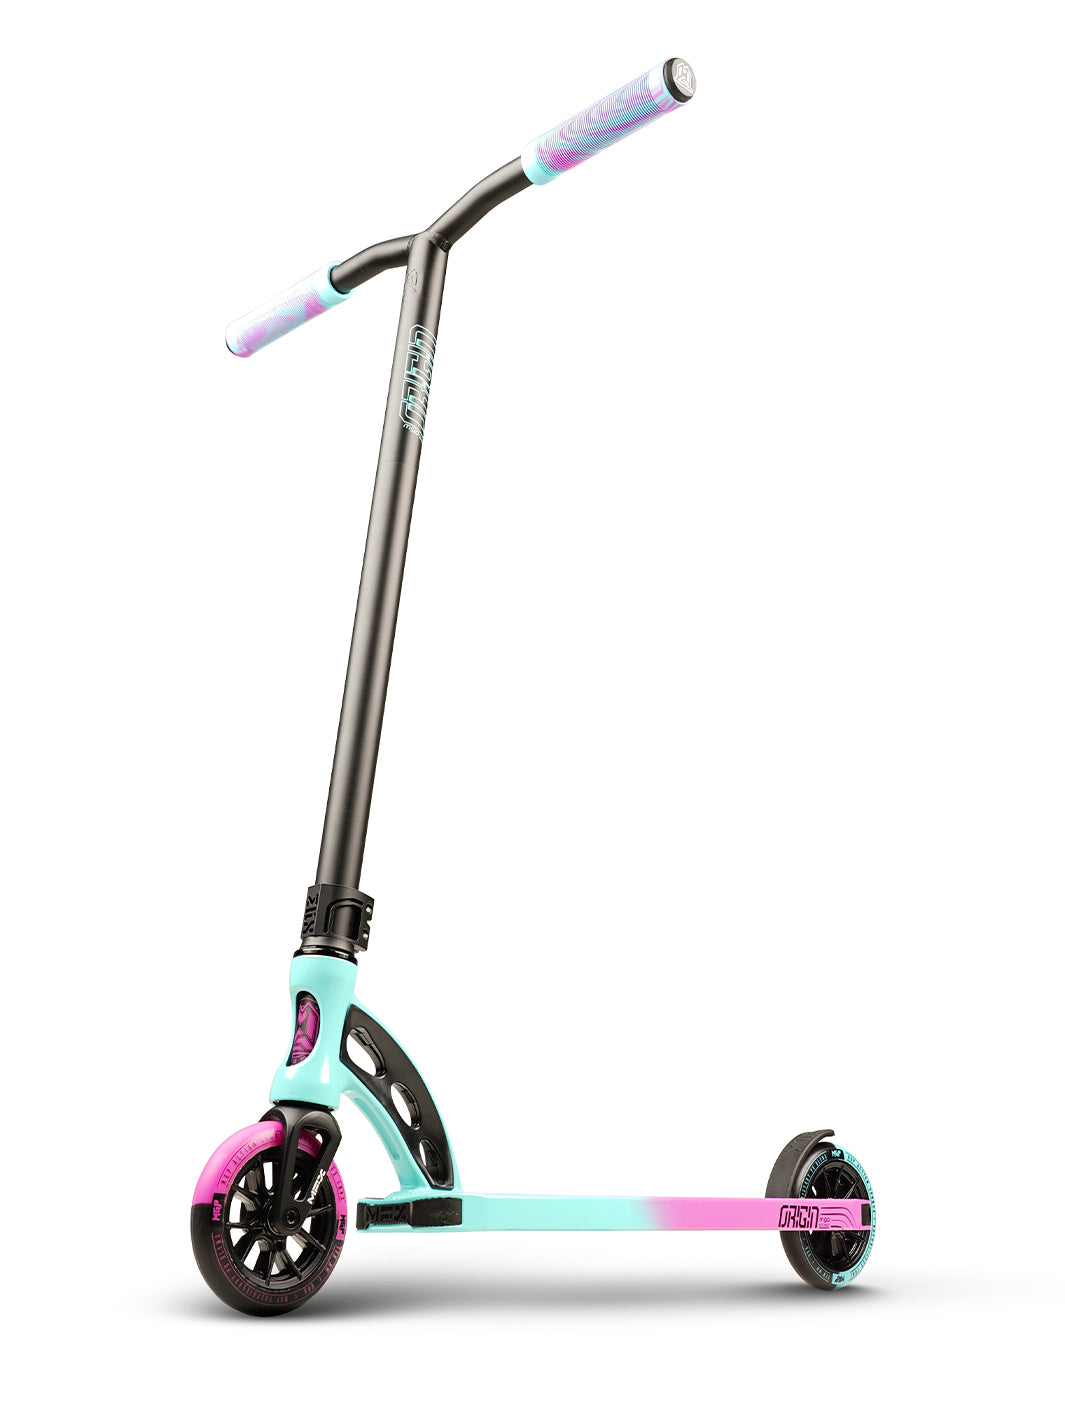 Madd Gear MGP Origin Pro Teal Pink Complete Scooter Lightest